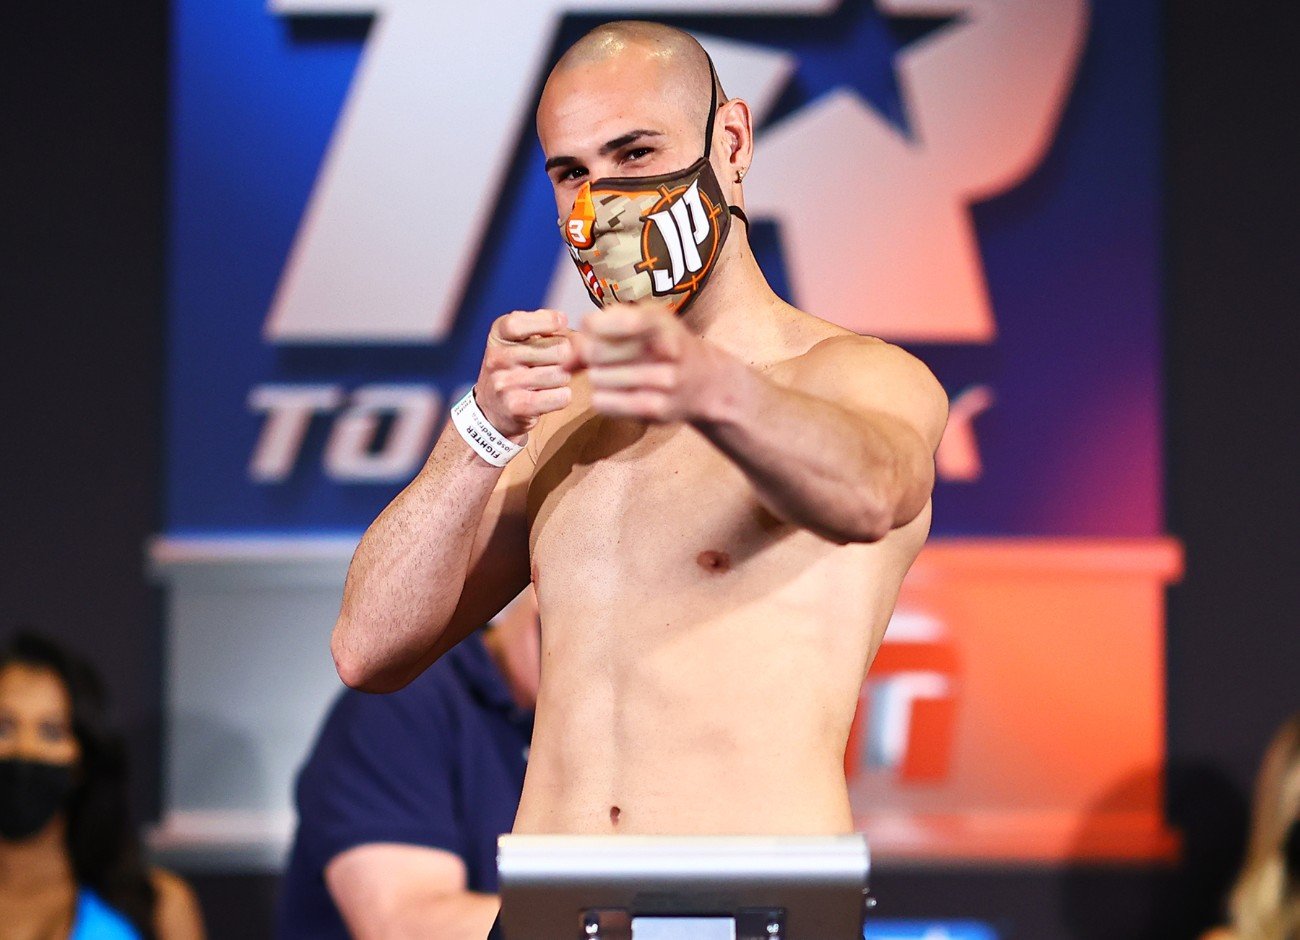 Image: Robeisy vs. Gonzales & Pedraza vs. LesPierre - official weigh-in results